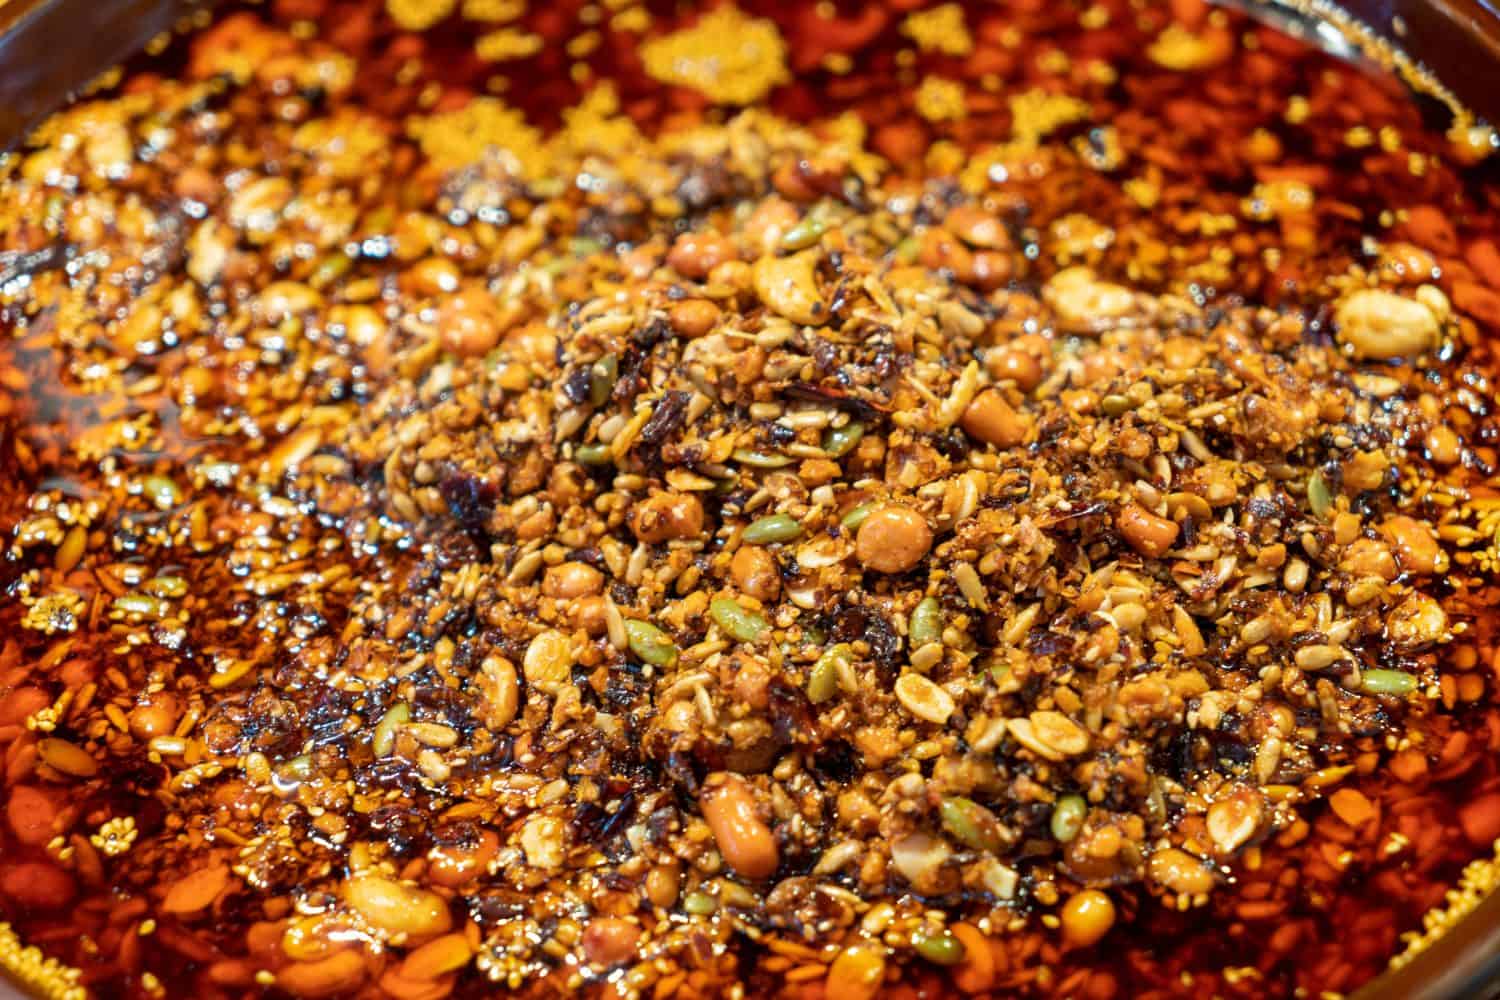 Chili sauce and fermented soybean sauce are a traditional Chinese delicacy